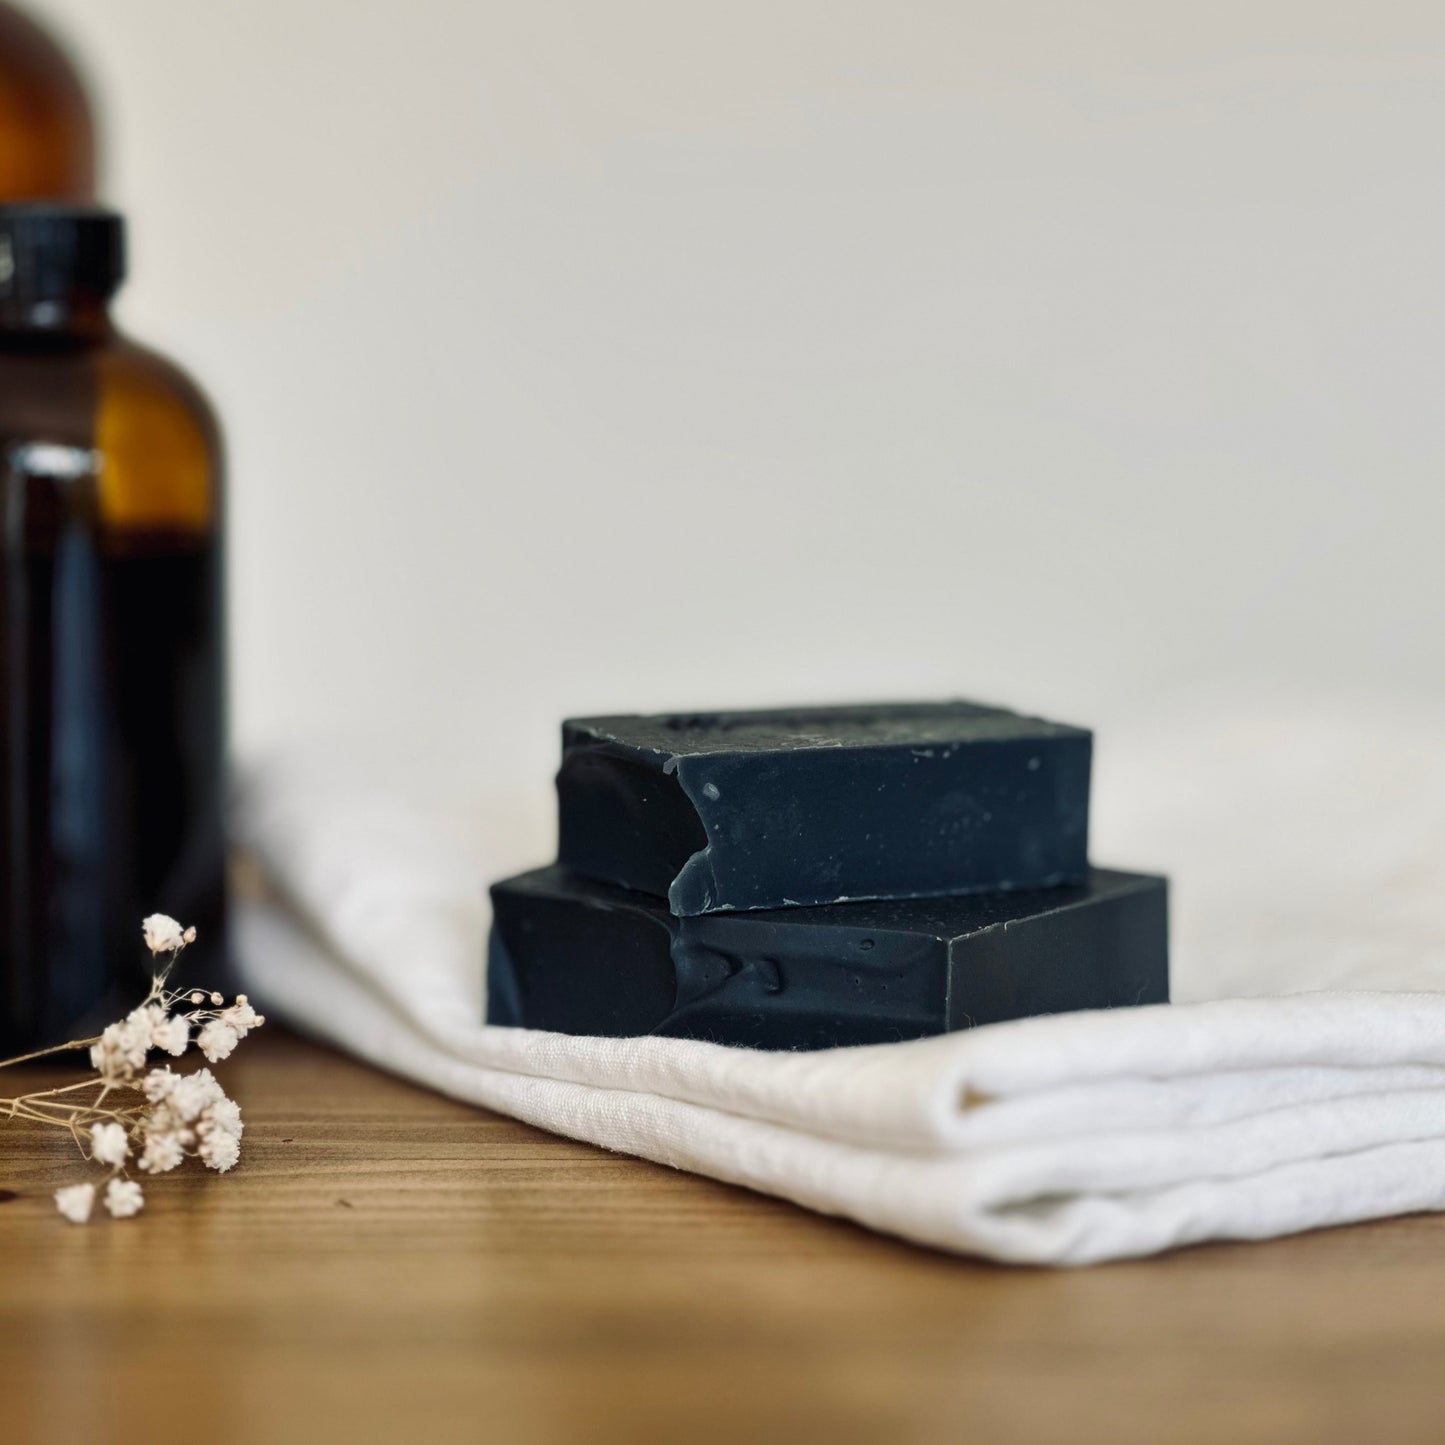 charcoal soap on white cloth